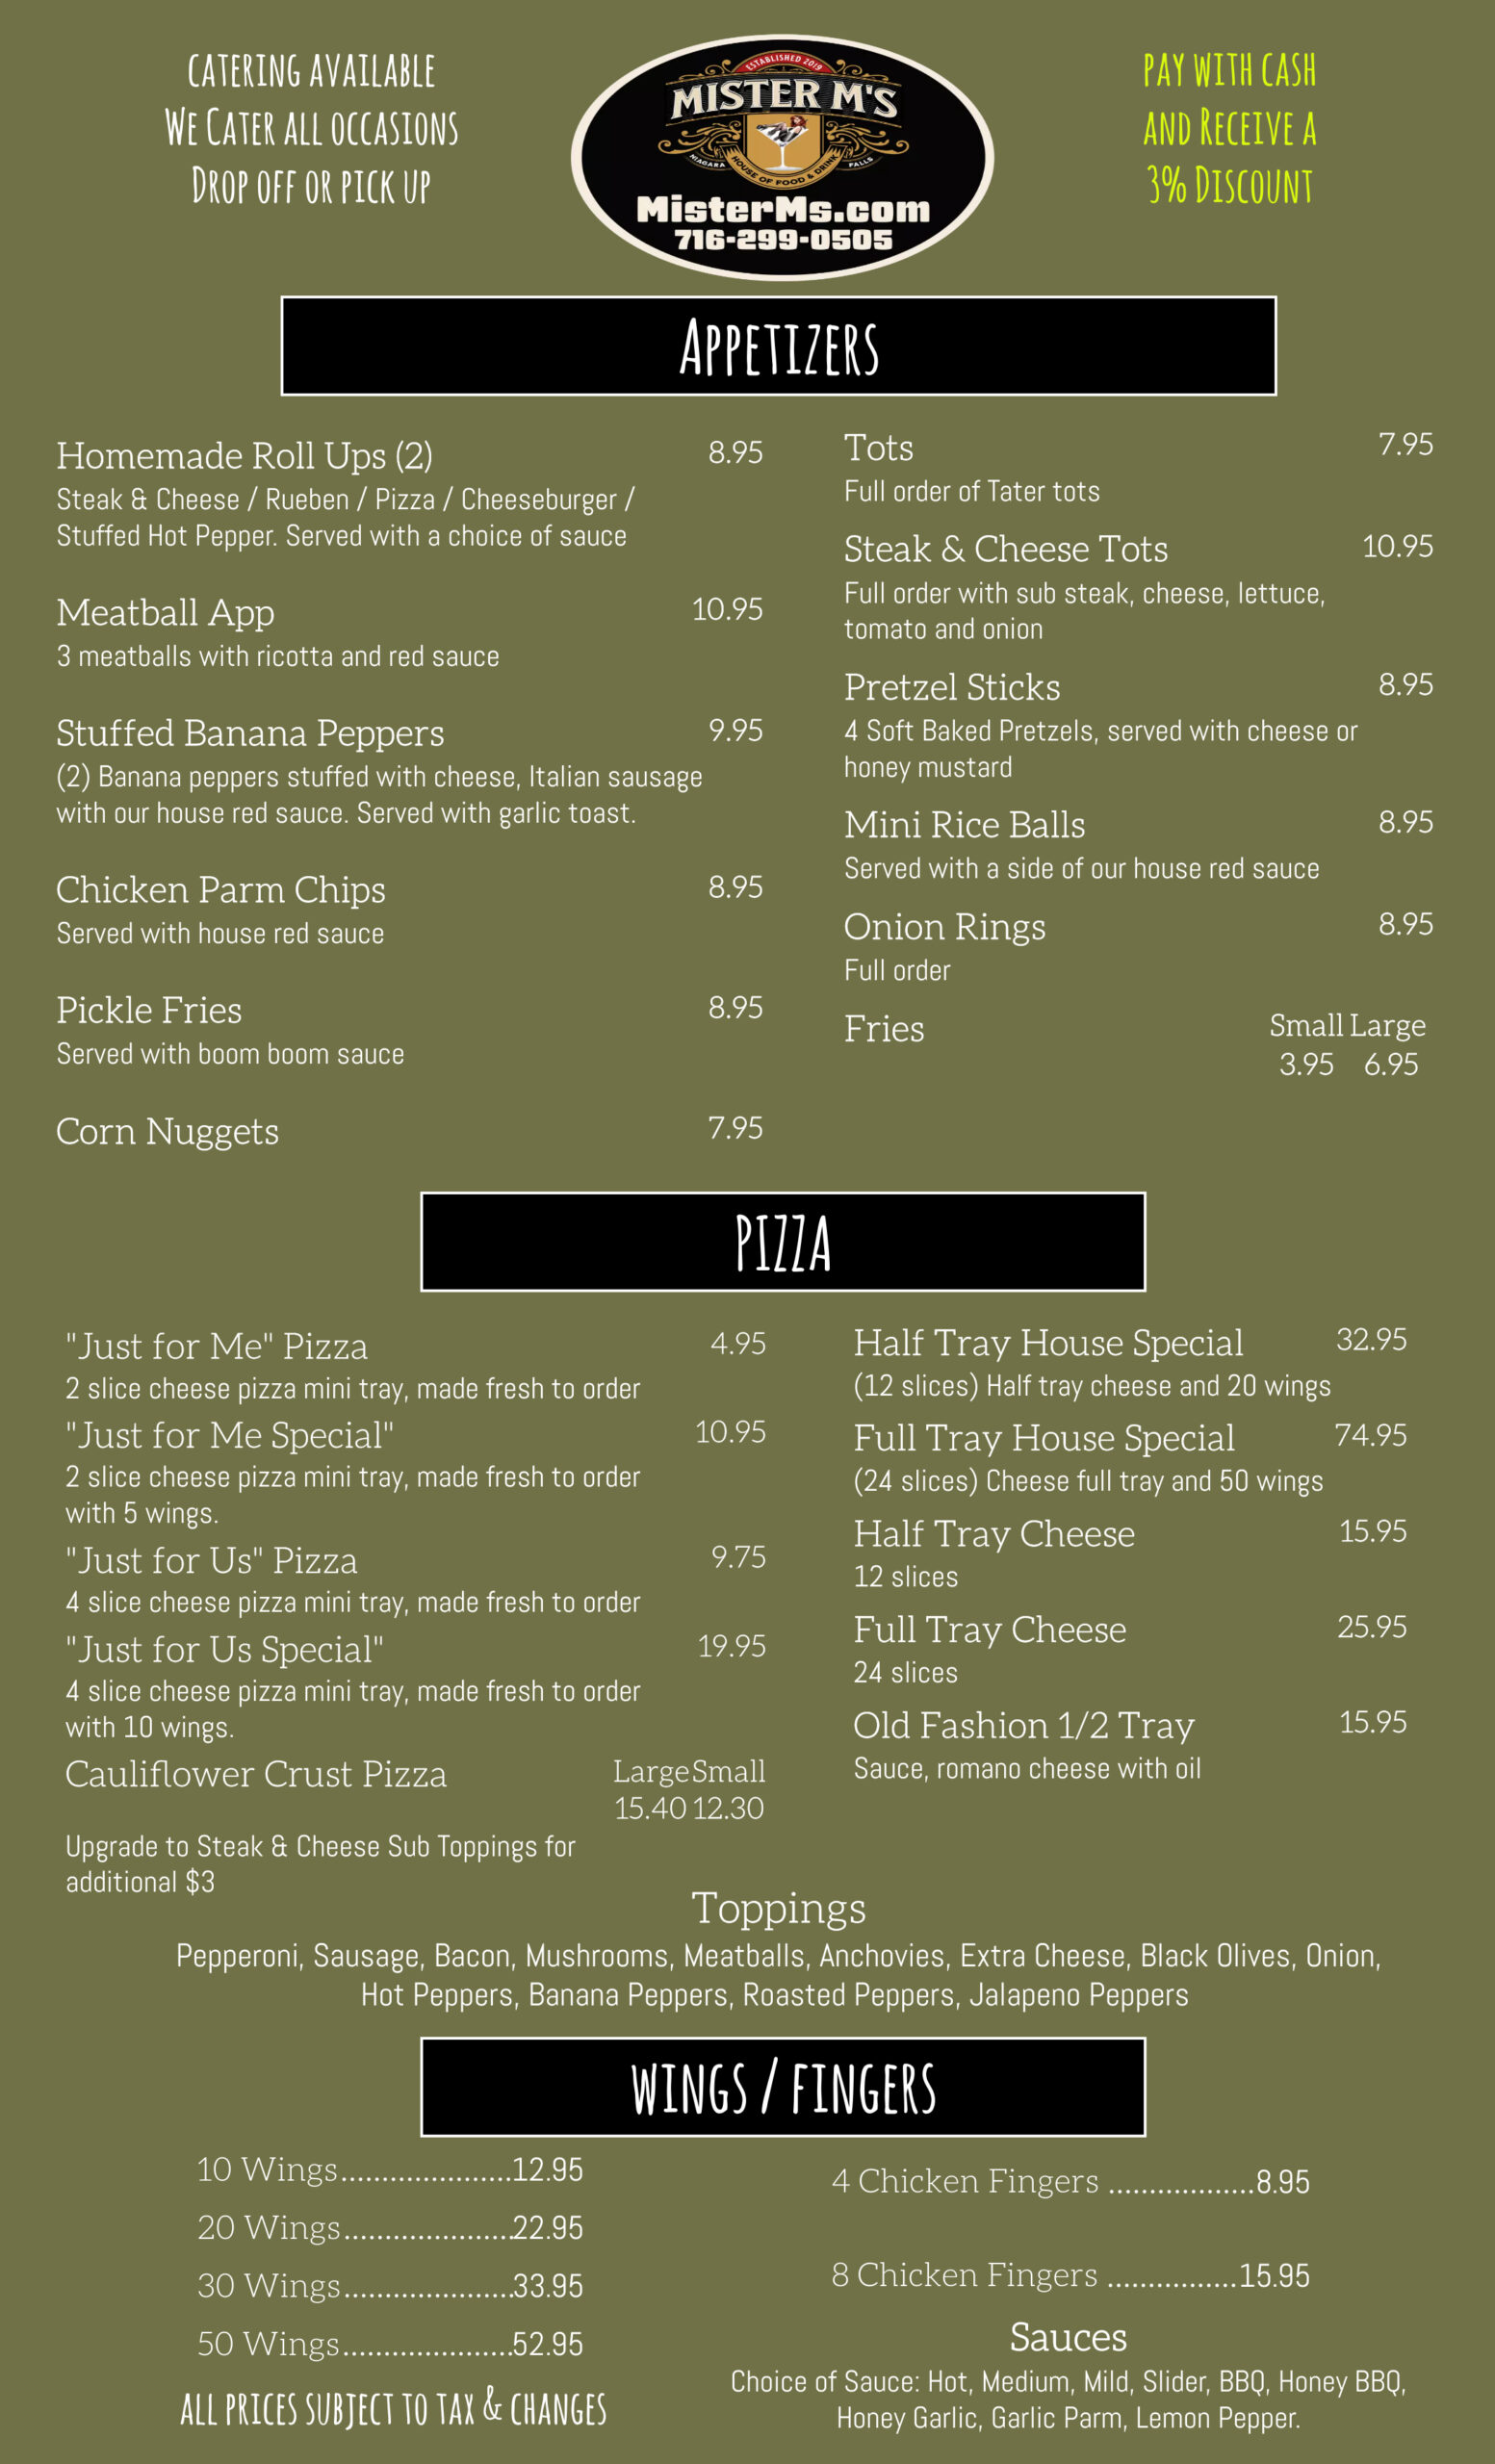 MS New Inhouse Menu Front Page 012024 (19.95)